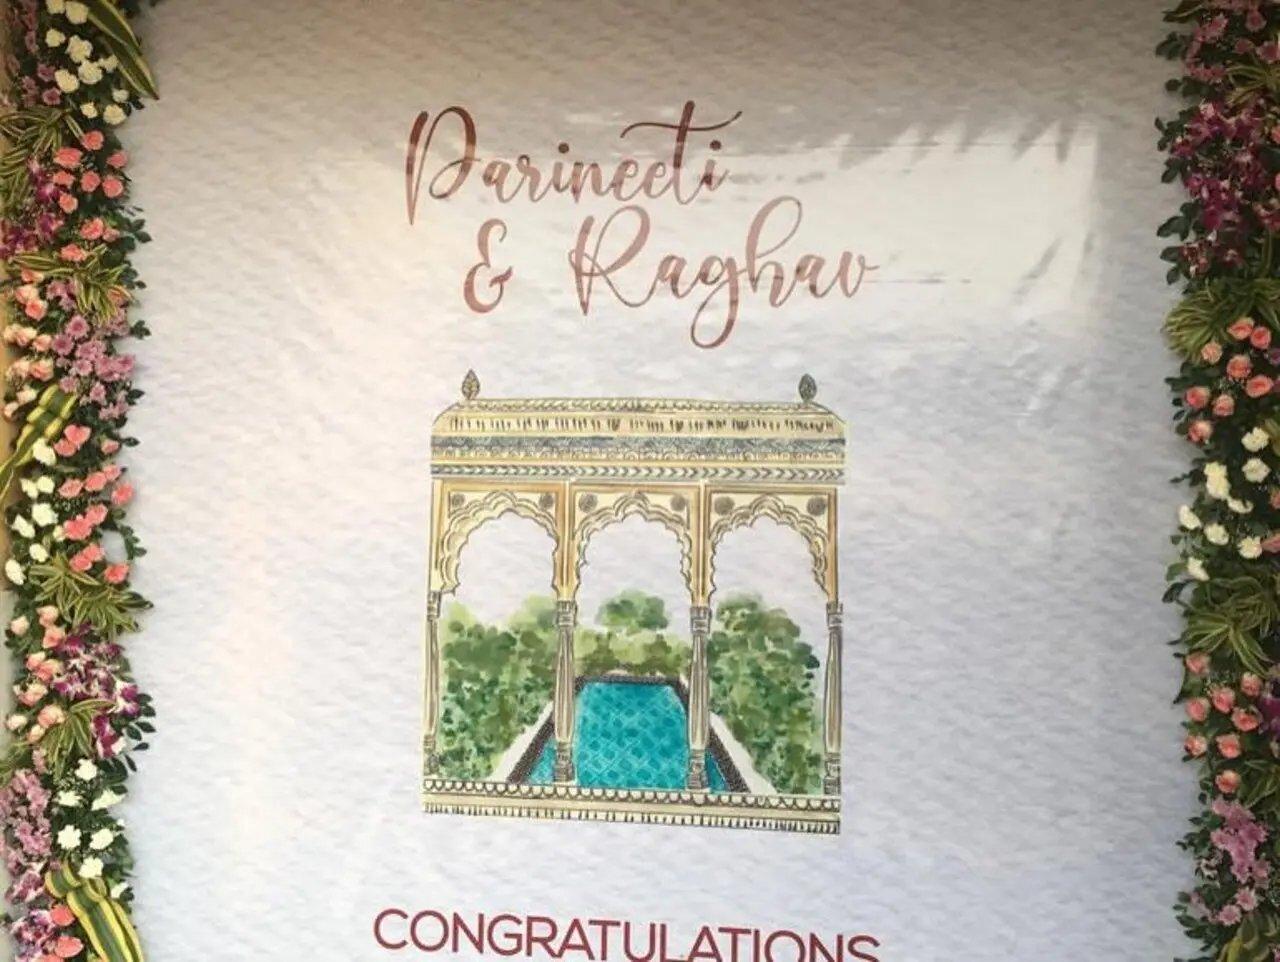 On Sunday, Parineeti will be turning into a bride for Raghav. They will take the wedding vows in a grand ceremony in the middle of lake Pichola in Udaipur